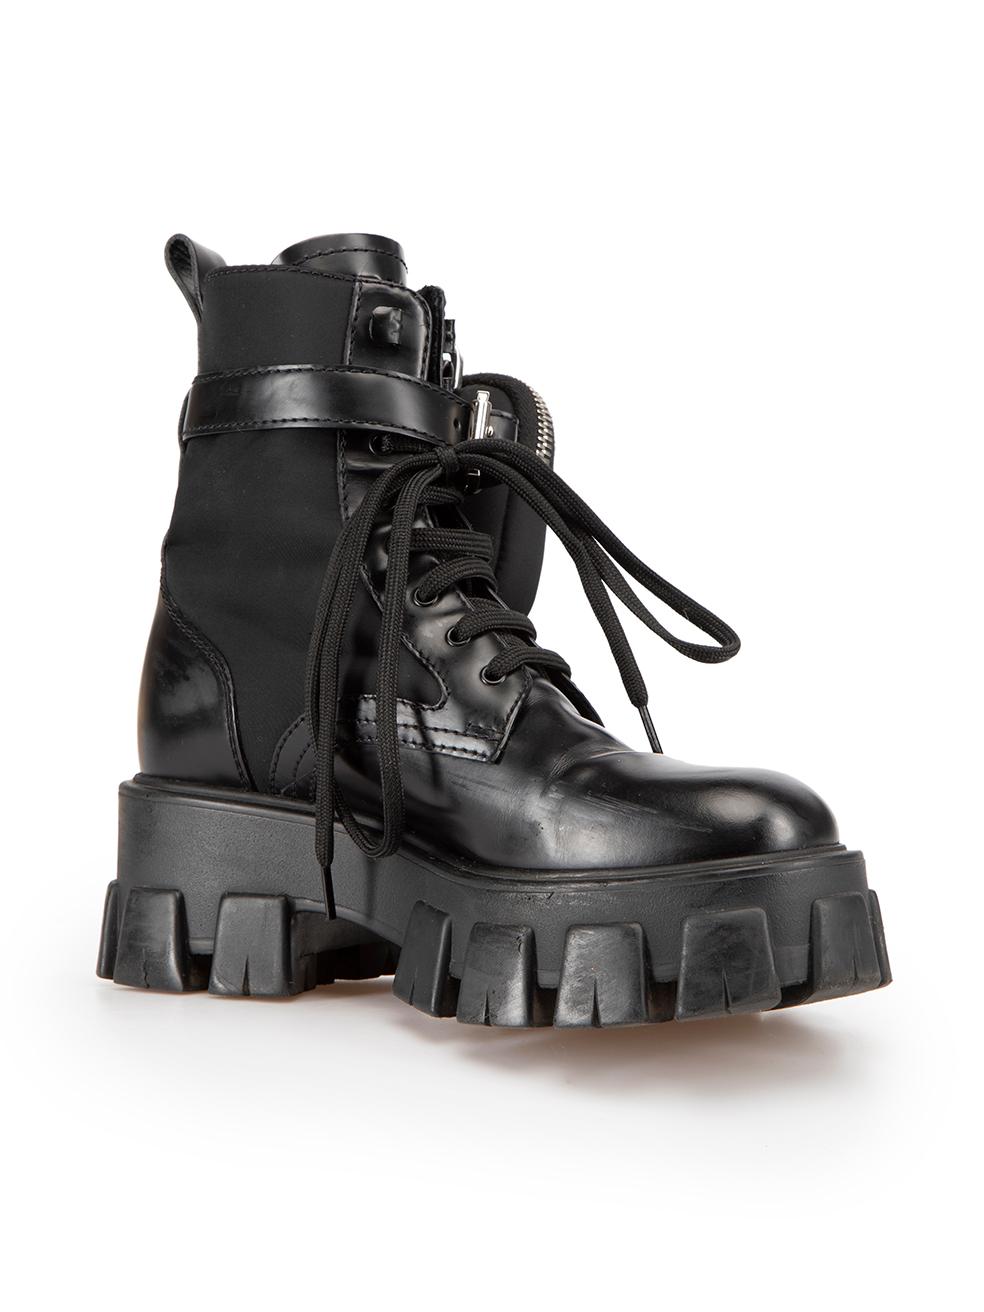 CONDITION is Very good. Minimal wear to boots is evident. Minimal wear to outer-soles and right side of left boot with minor scuff marks and general creasing to the leather of both boots on this used Prada designer resale